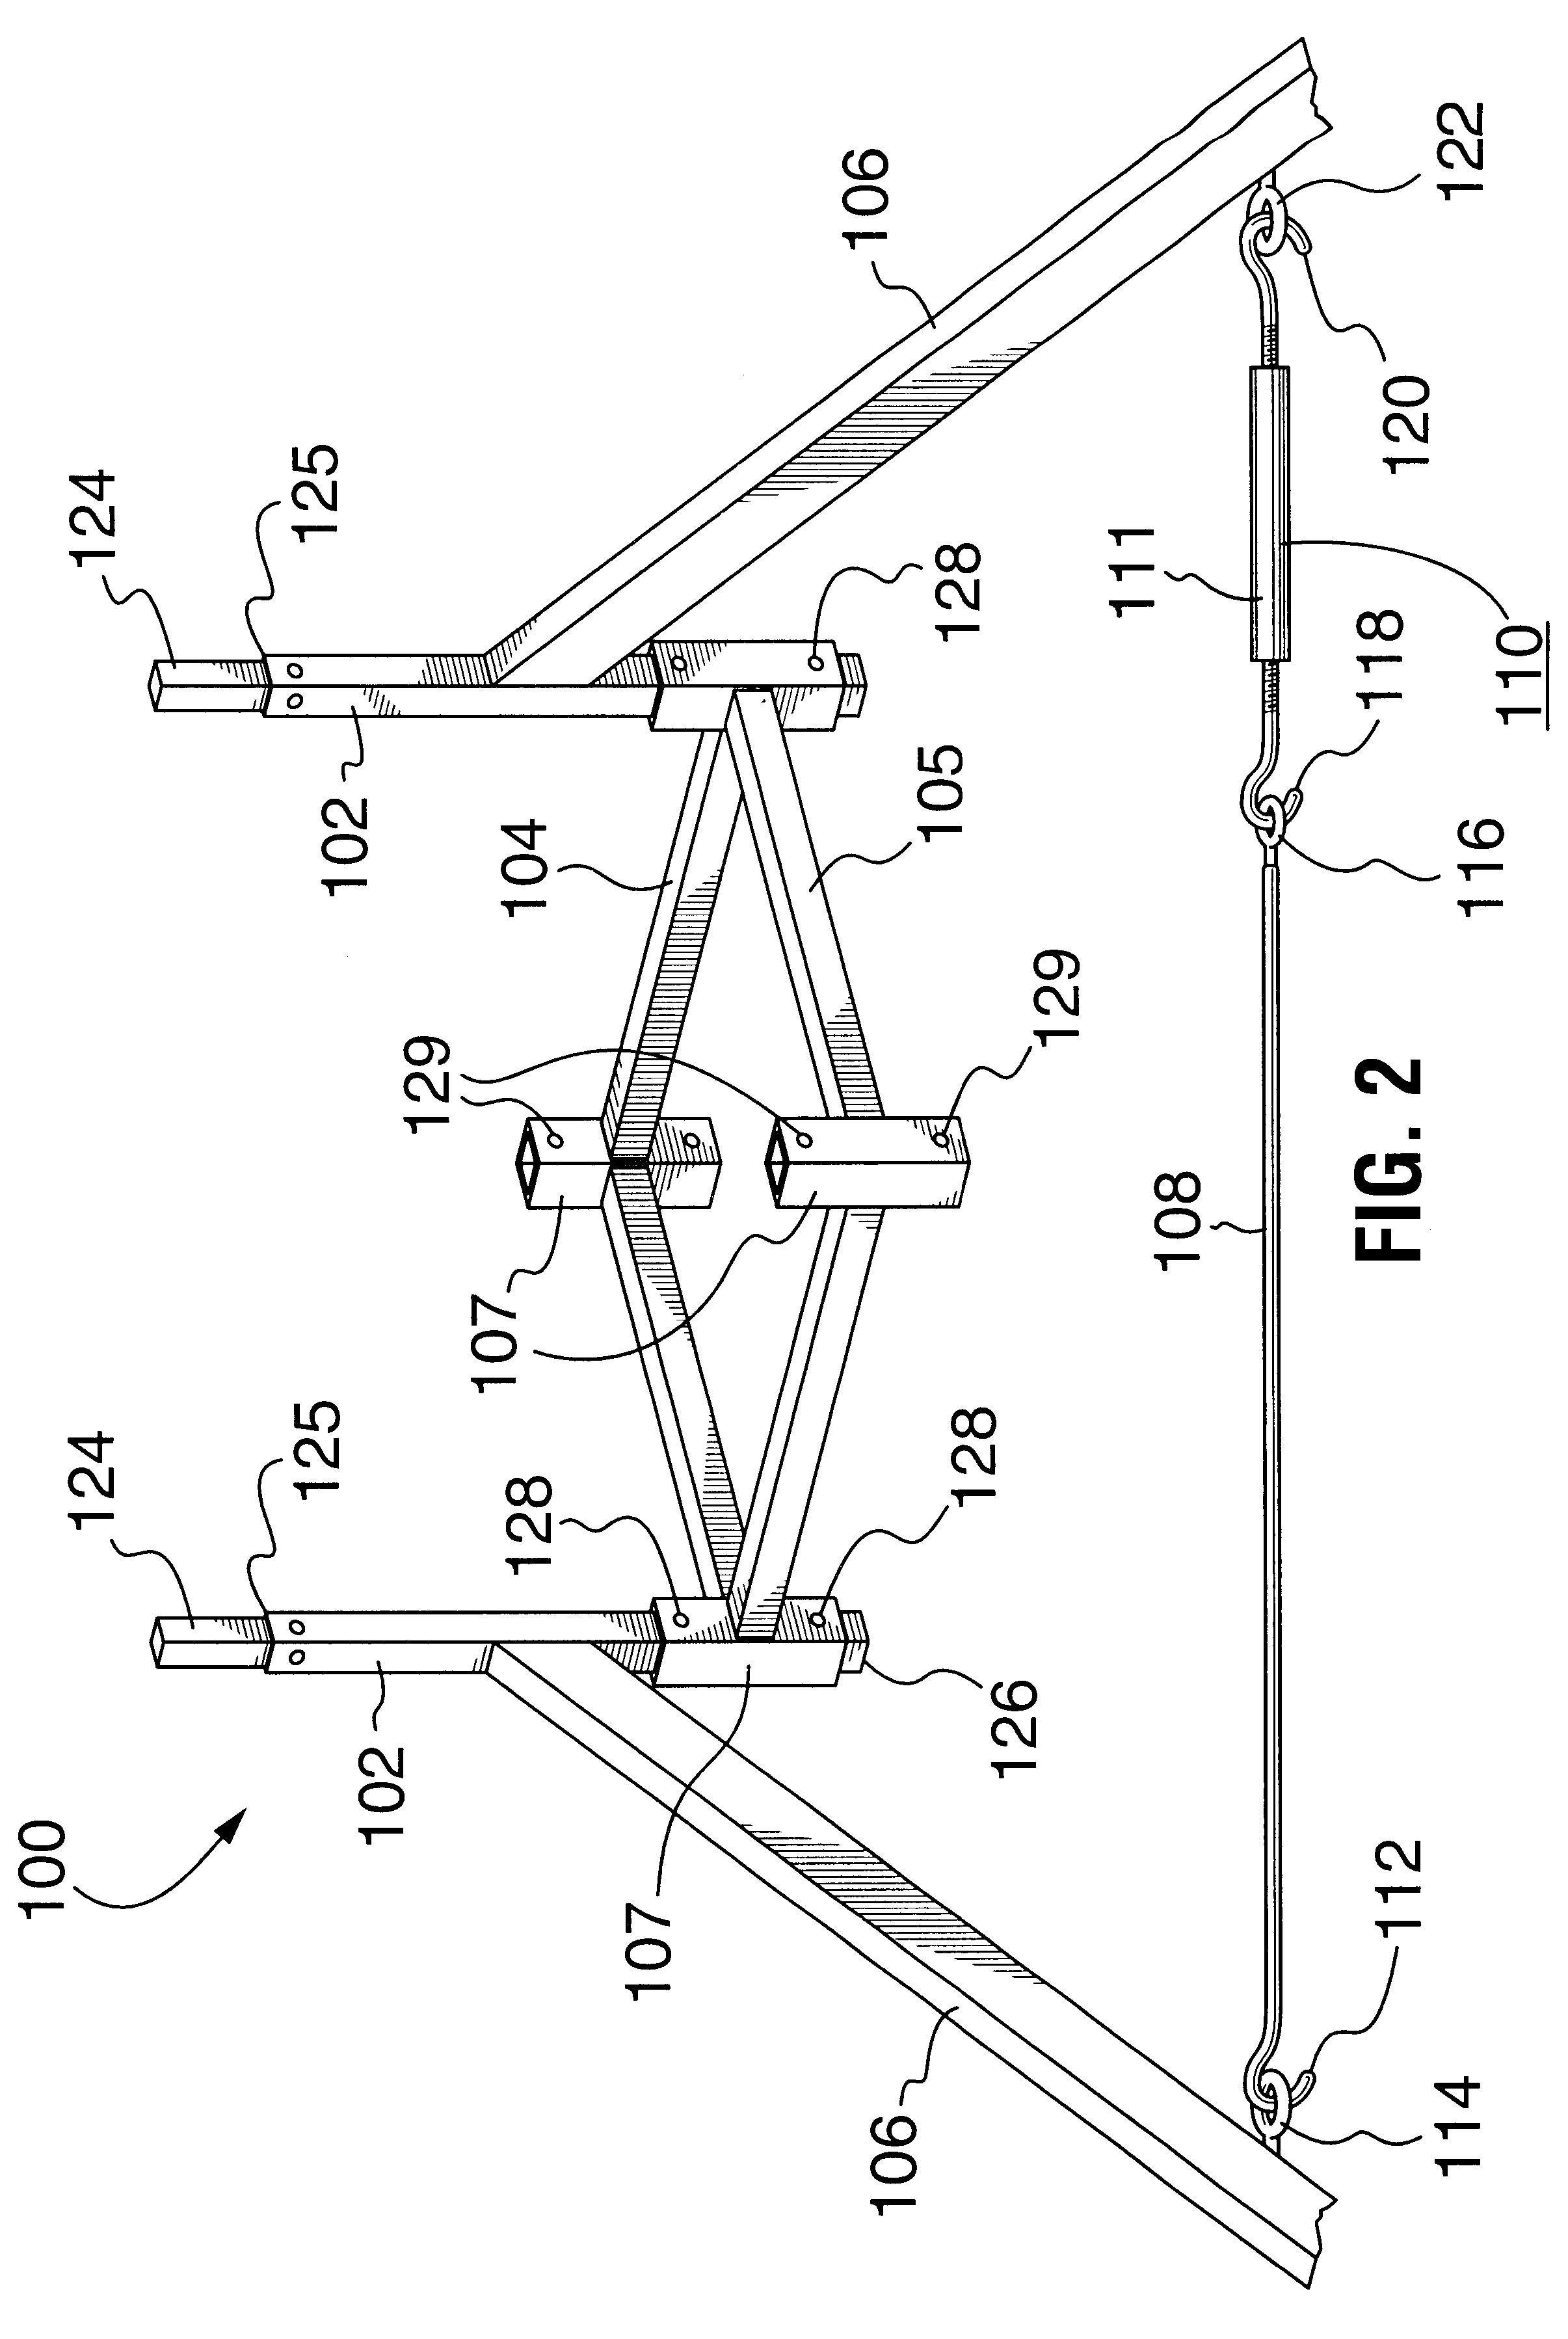 Stability alignment frame for erecting a portable multi-purpose stand